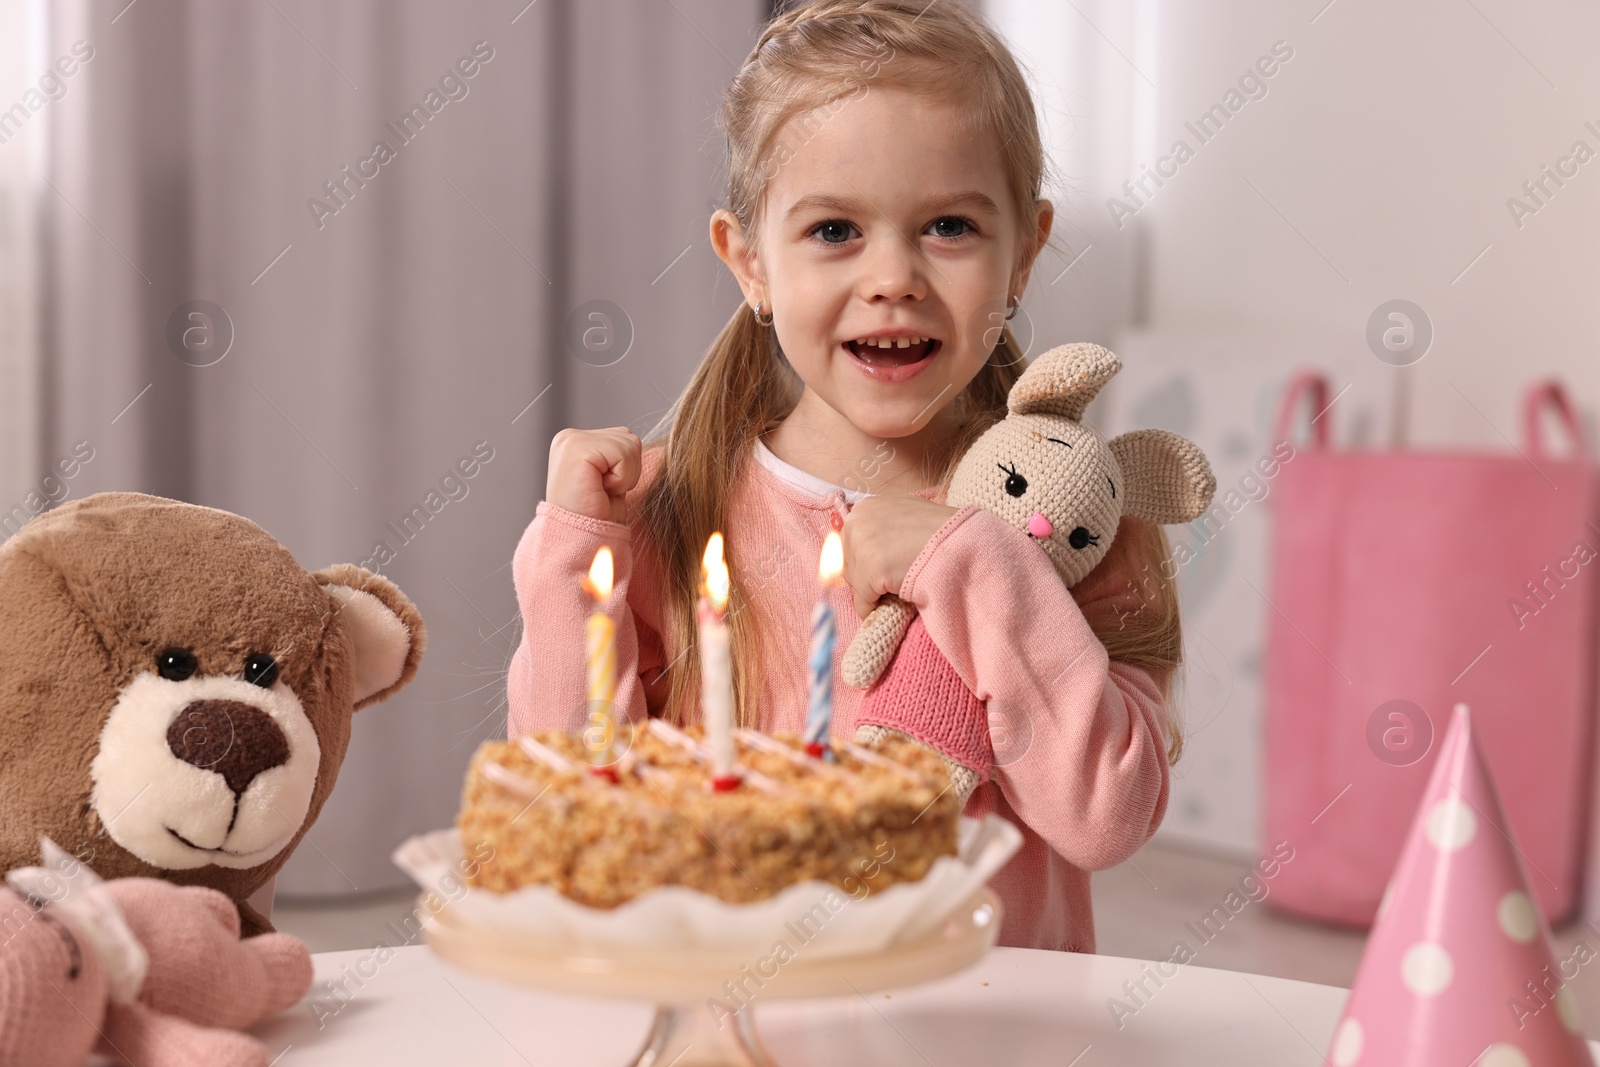 Photo of Cute girl with birthday cake and toys at table indoors